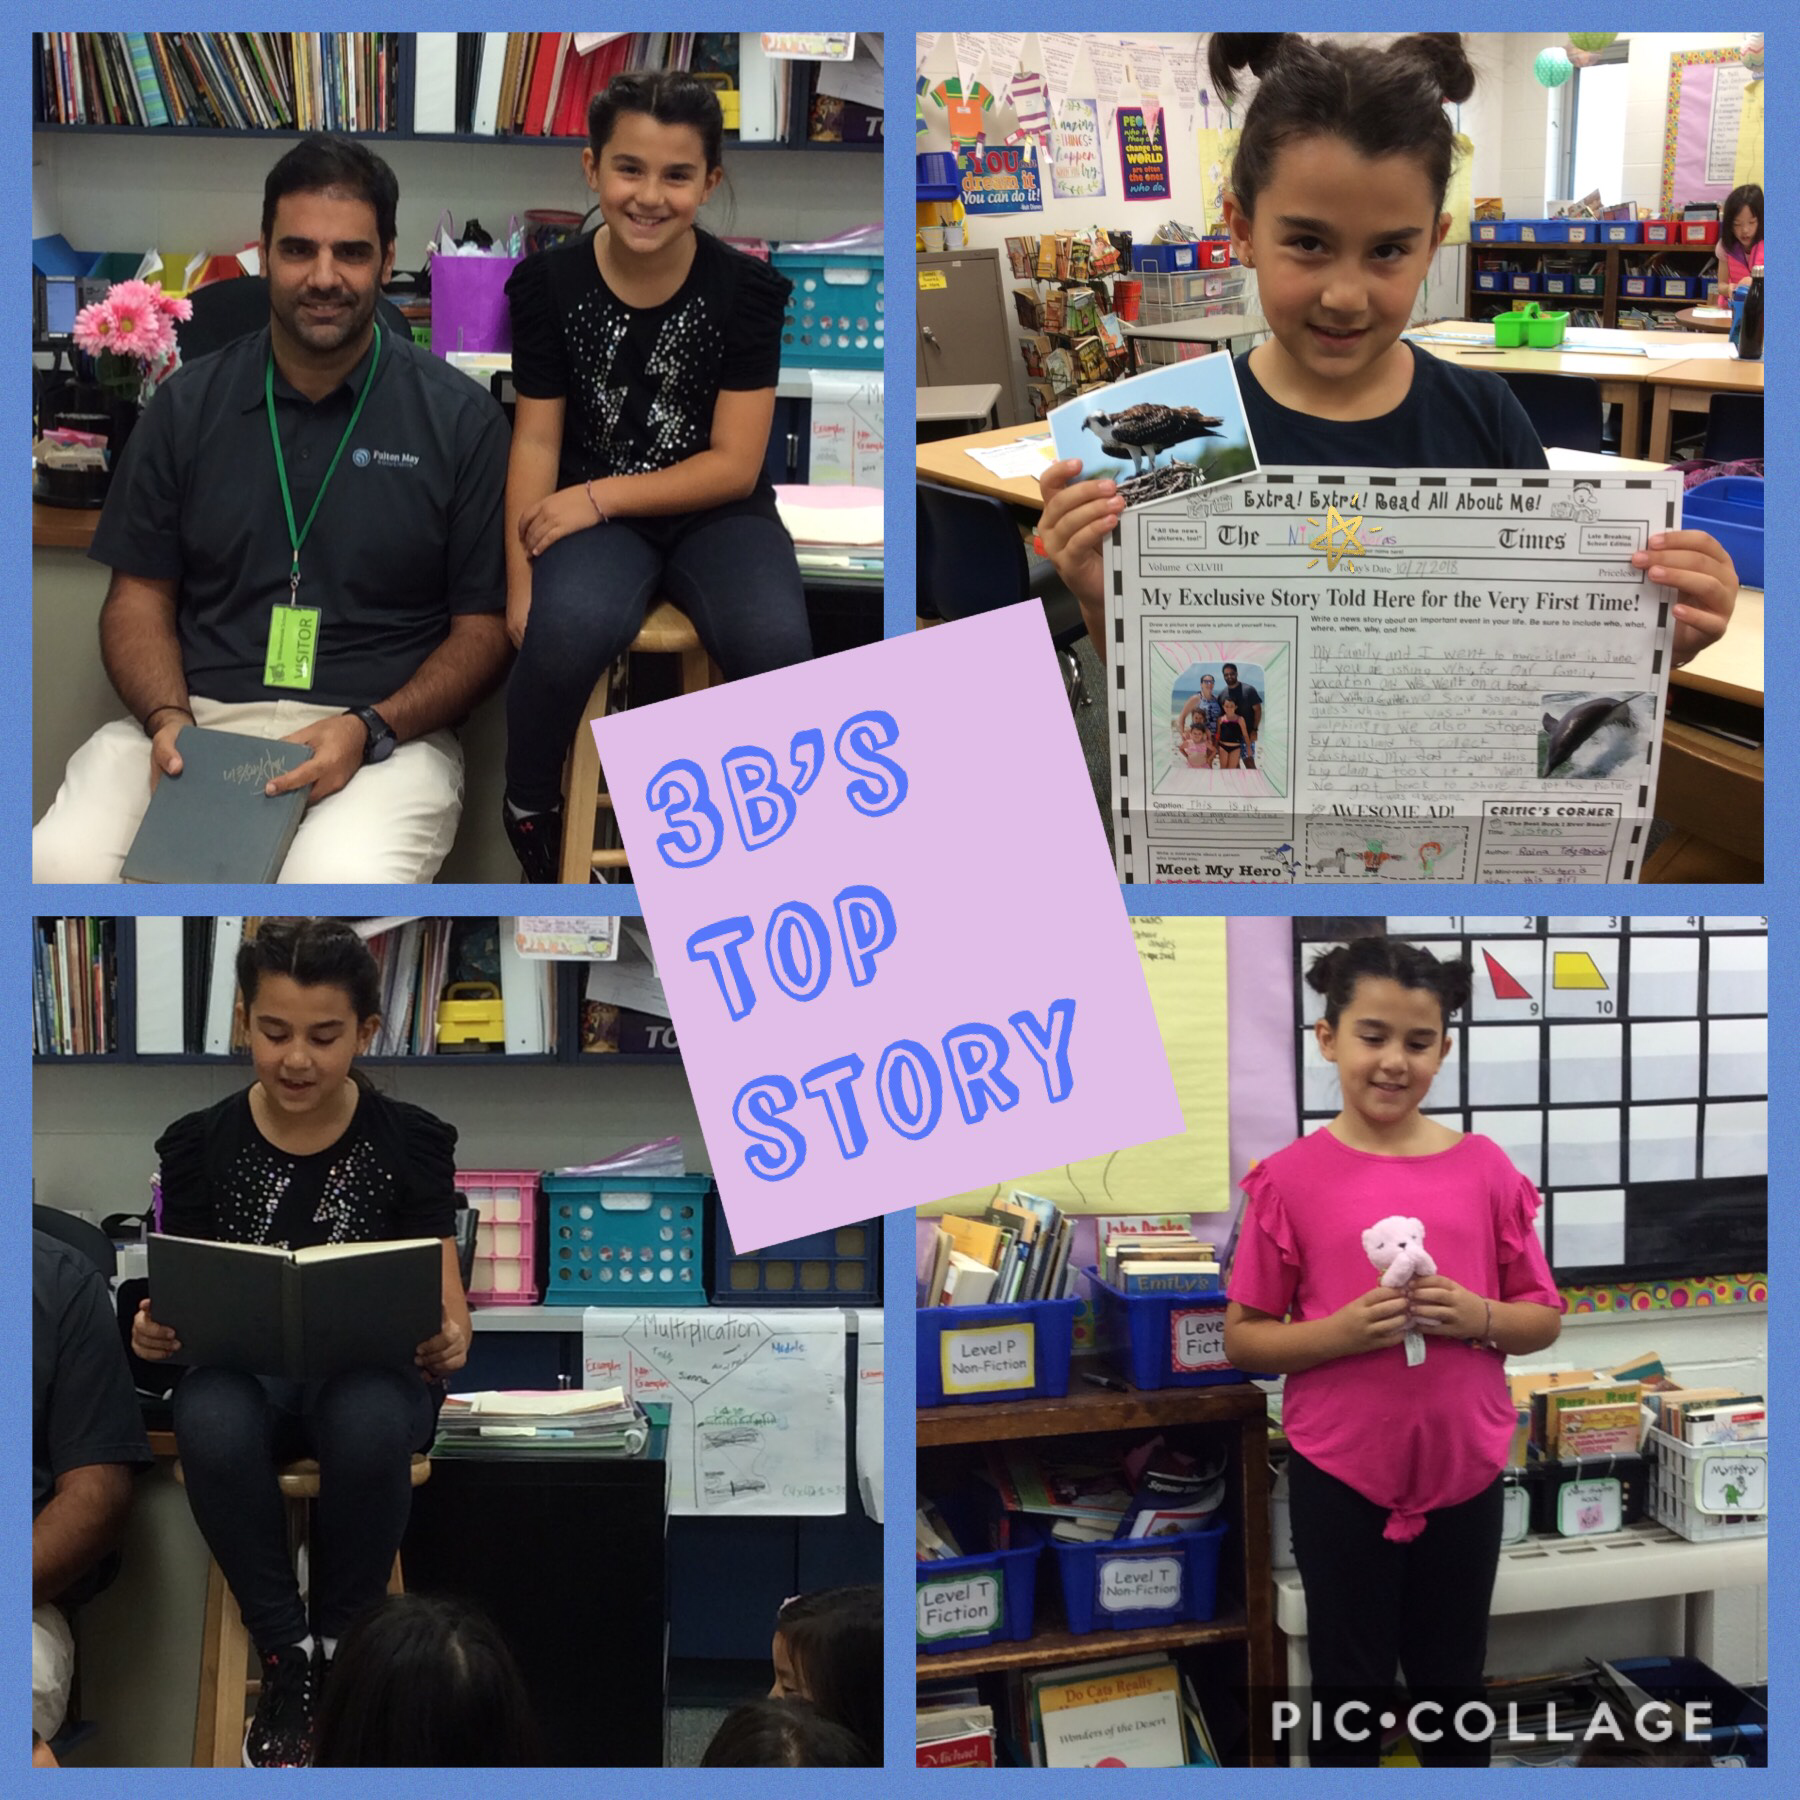 3B’s Top Story #d30learns